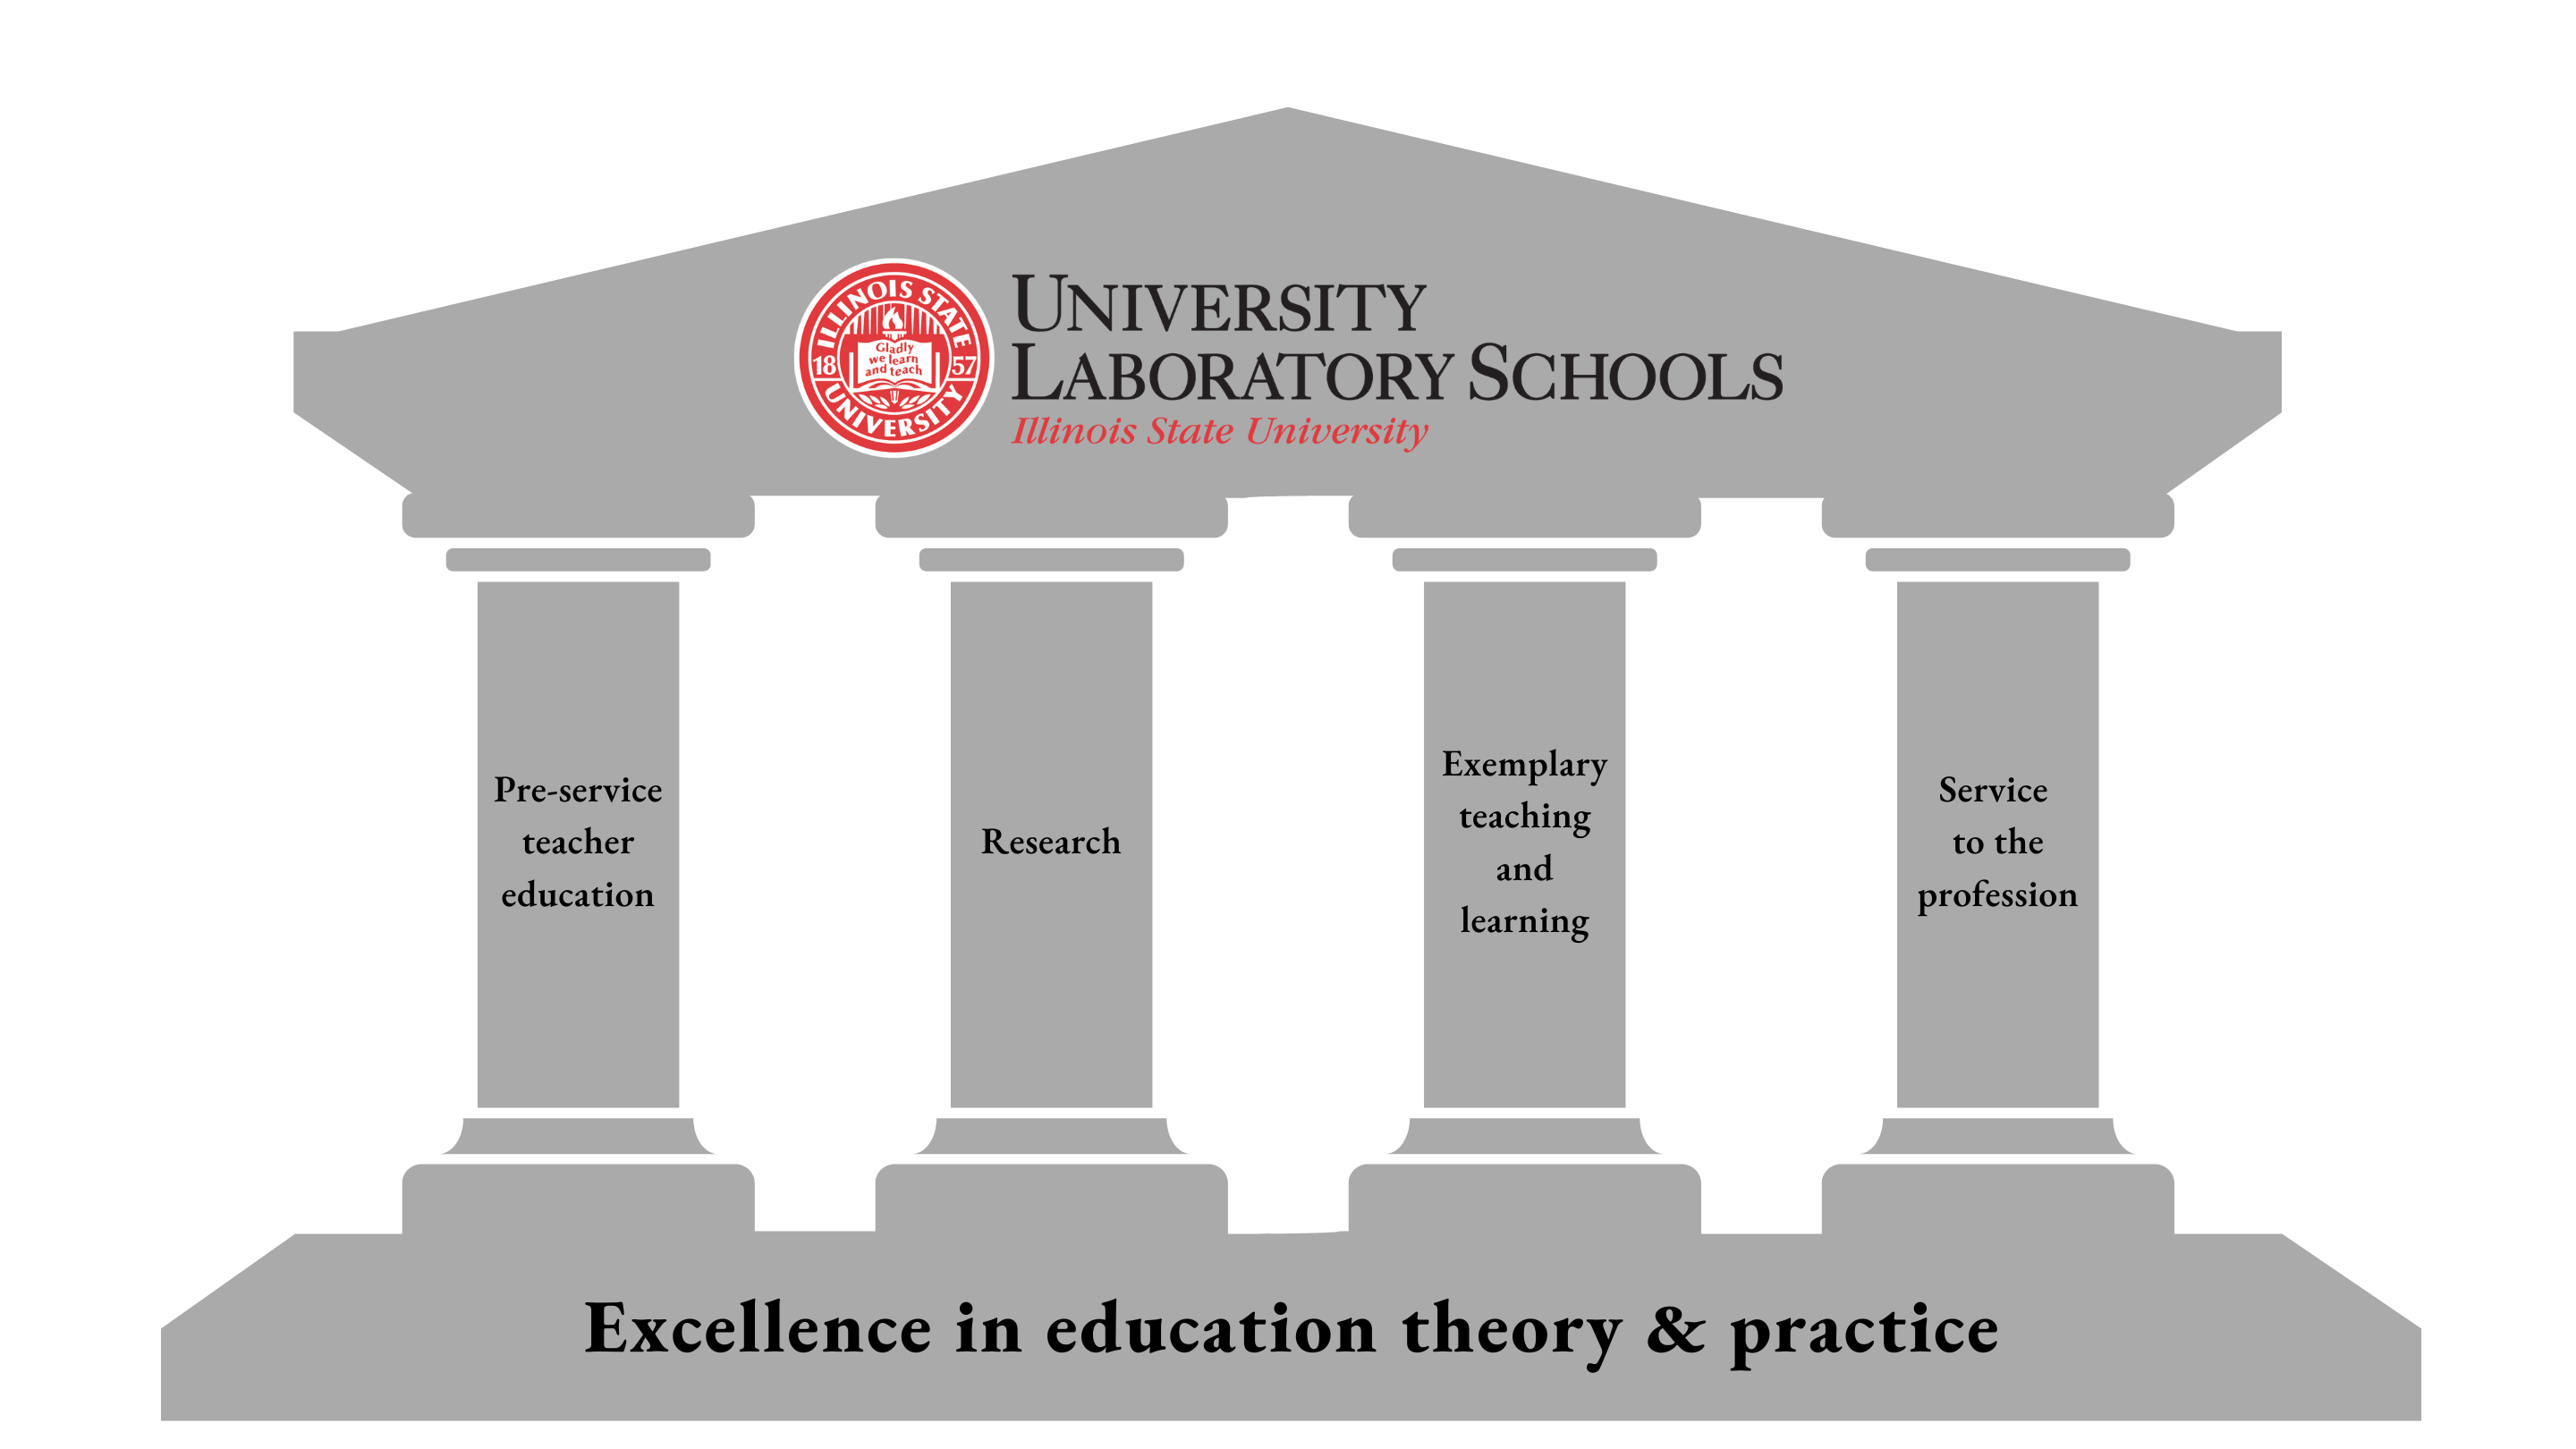 A graphic representation of the Laboratory Schools' mission. Pictured is a Greek building. At the top is University Laboratory Schools, supported by pillars named pre-service teacher education, research, exemplary teaching and learning, and service to the profession. The foundation of the building is labeled as excellence in education theory and practice.